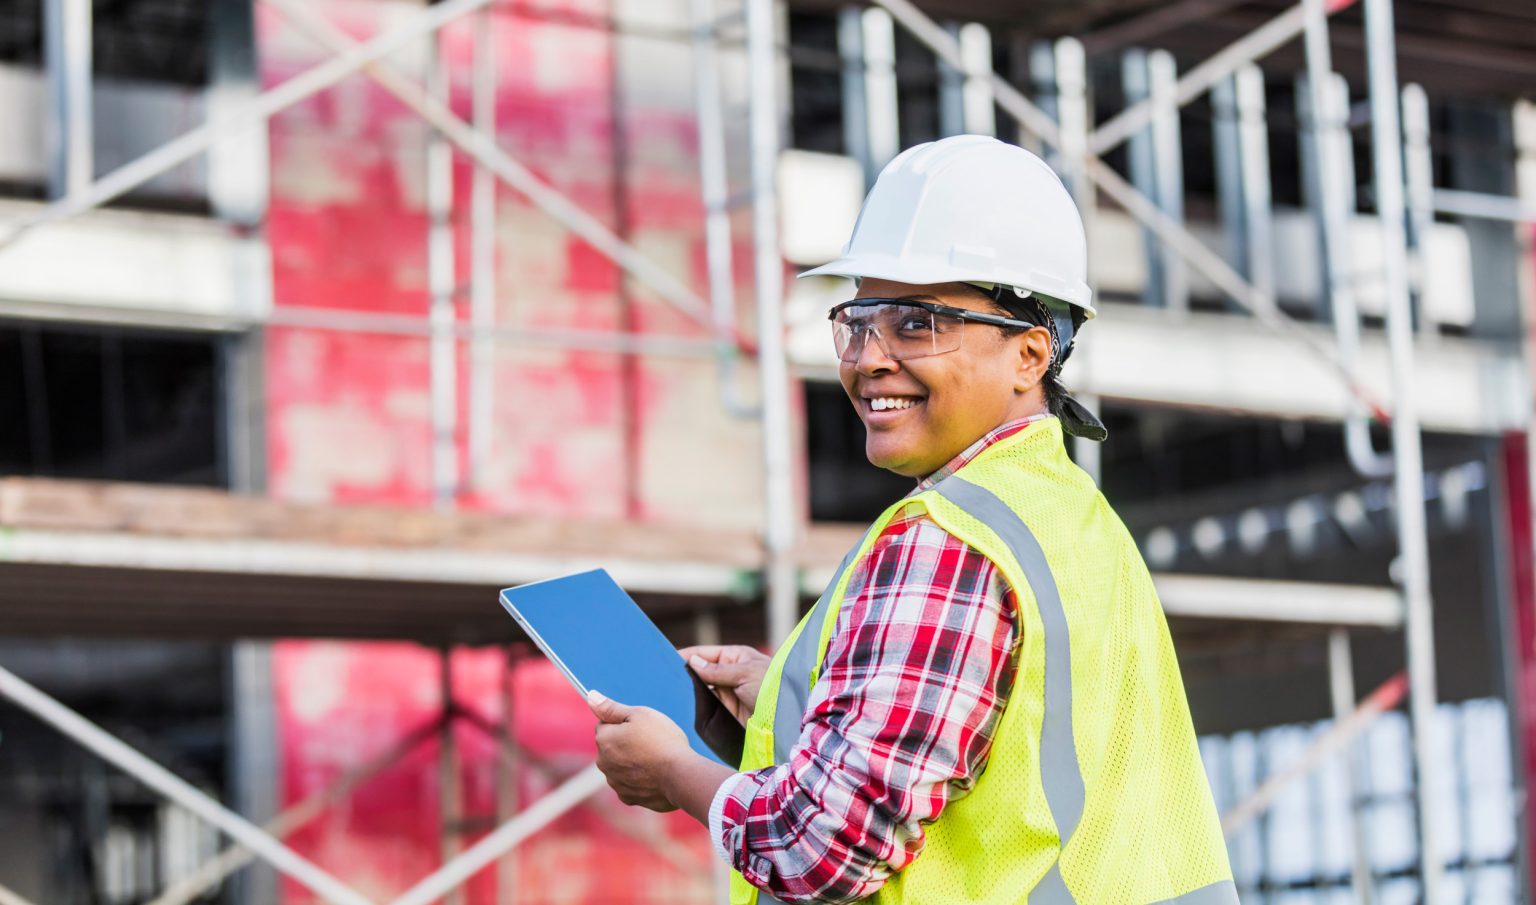 Woman construction worker at a construction site wearing a hard hat and safety glasses with a tablet and smiling.